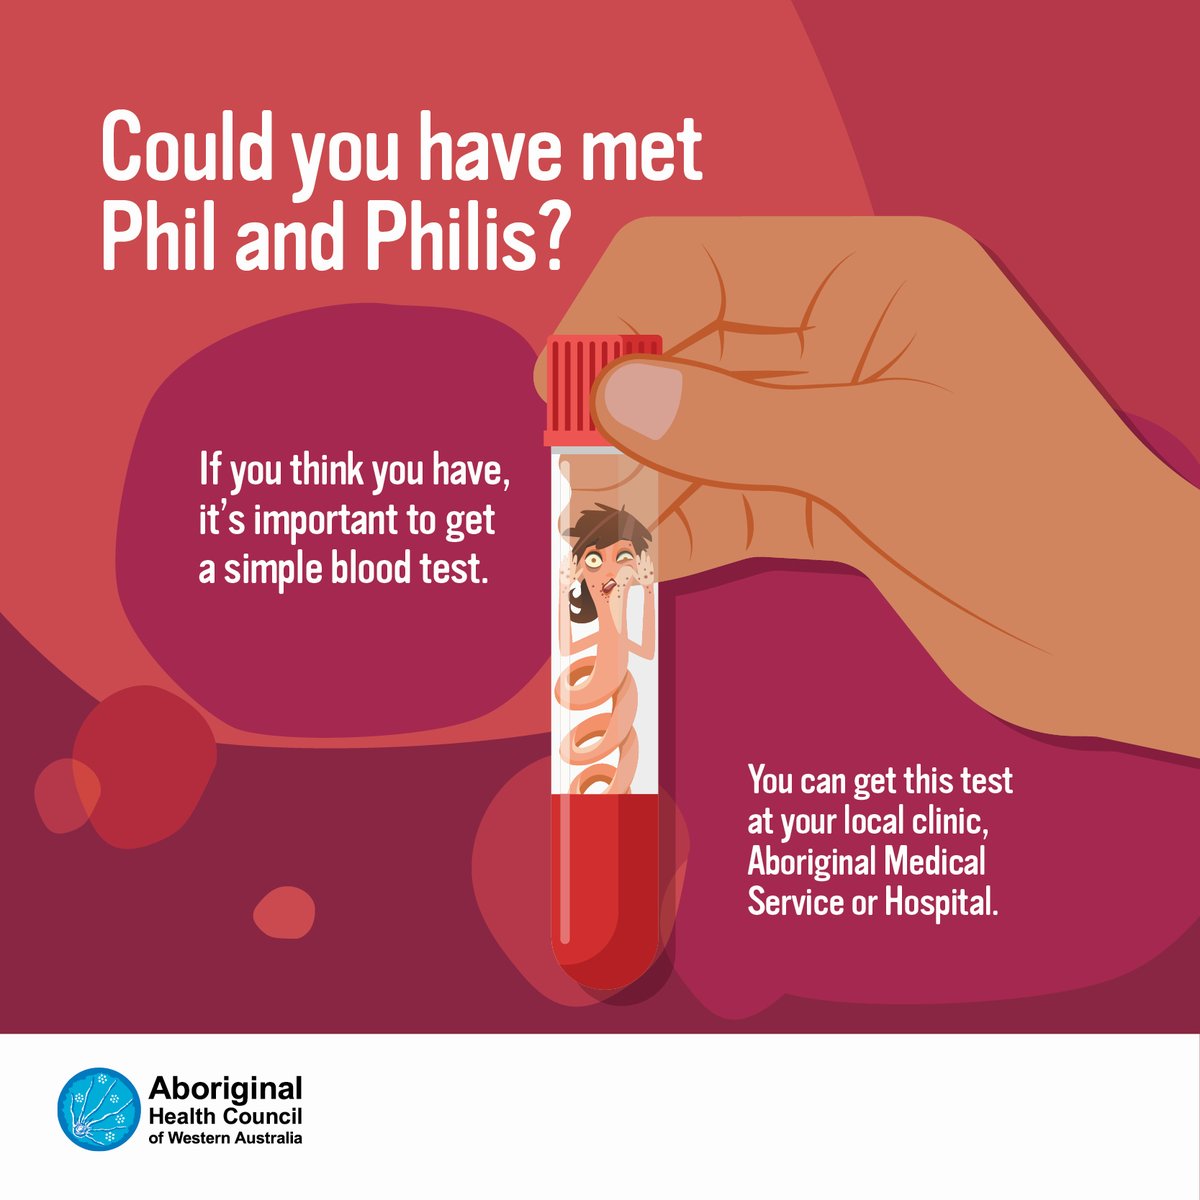 Syphilis is a sexually transmitted infection that can cause serious health problems without treatment. If you think you may have syphilis, it is important to see a doctor as soon as possible. #syphilis #aboriginalhealth #syphilisprevention #philandphilis